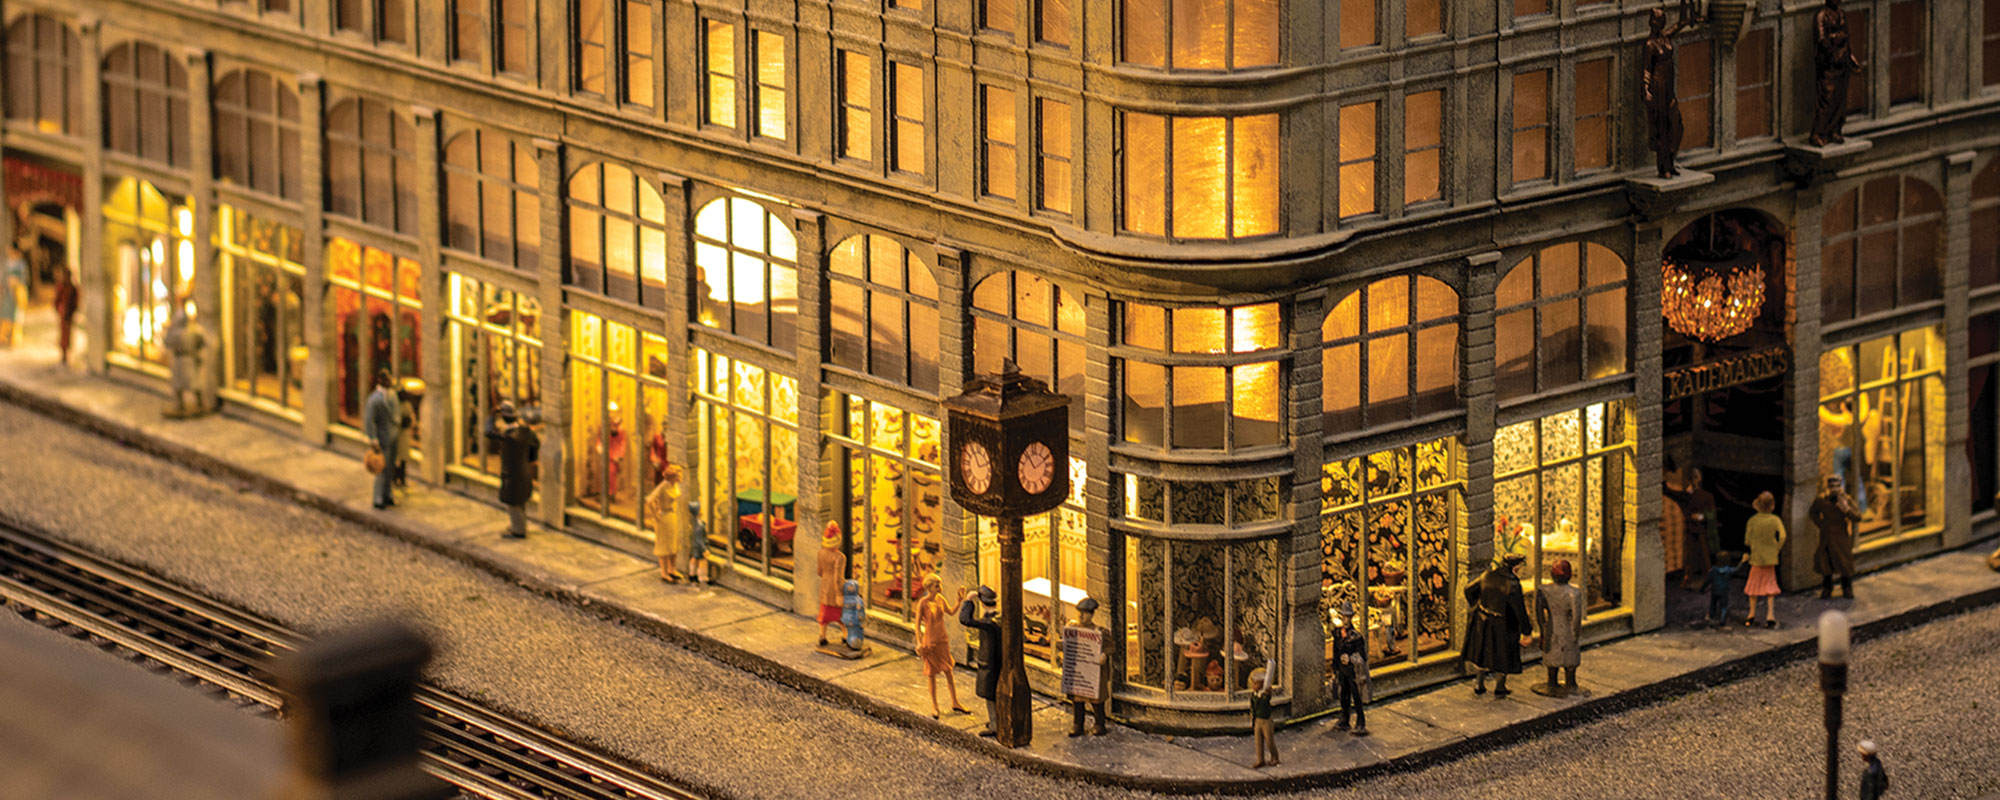 A replica of a vintage department store